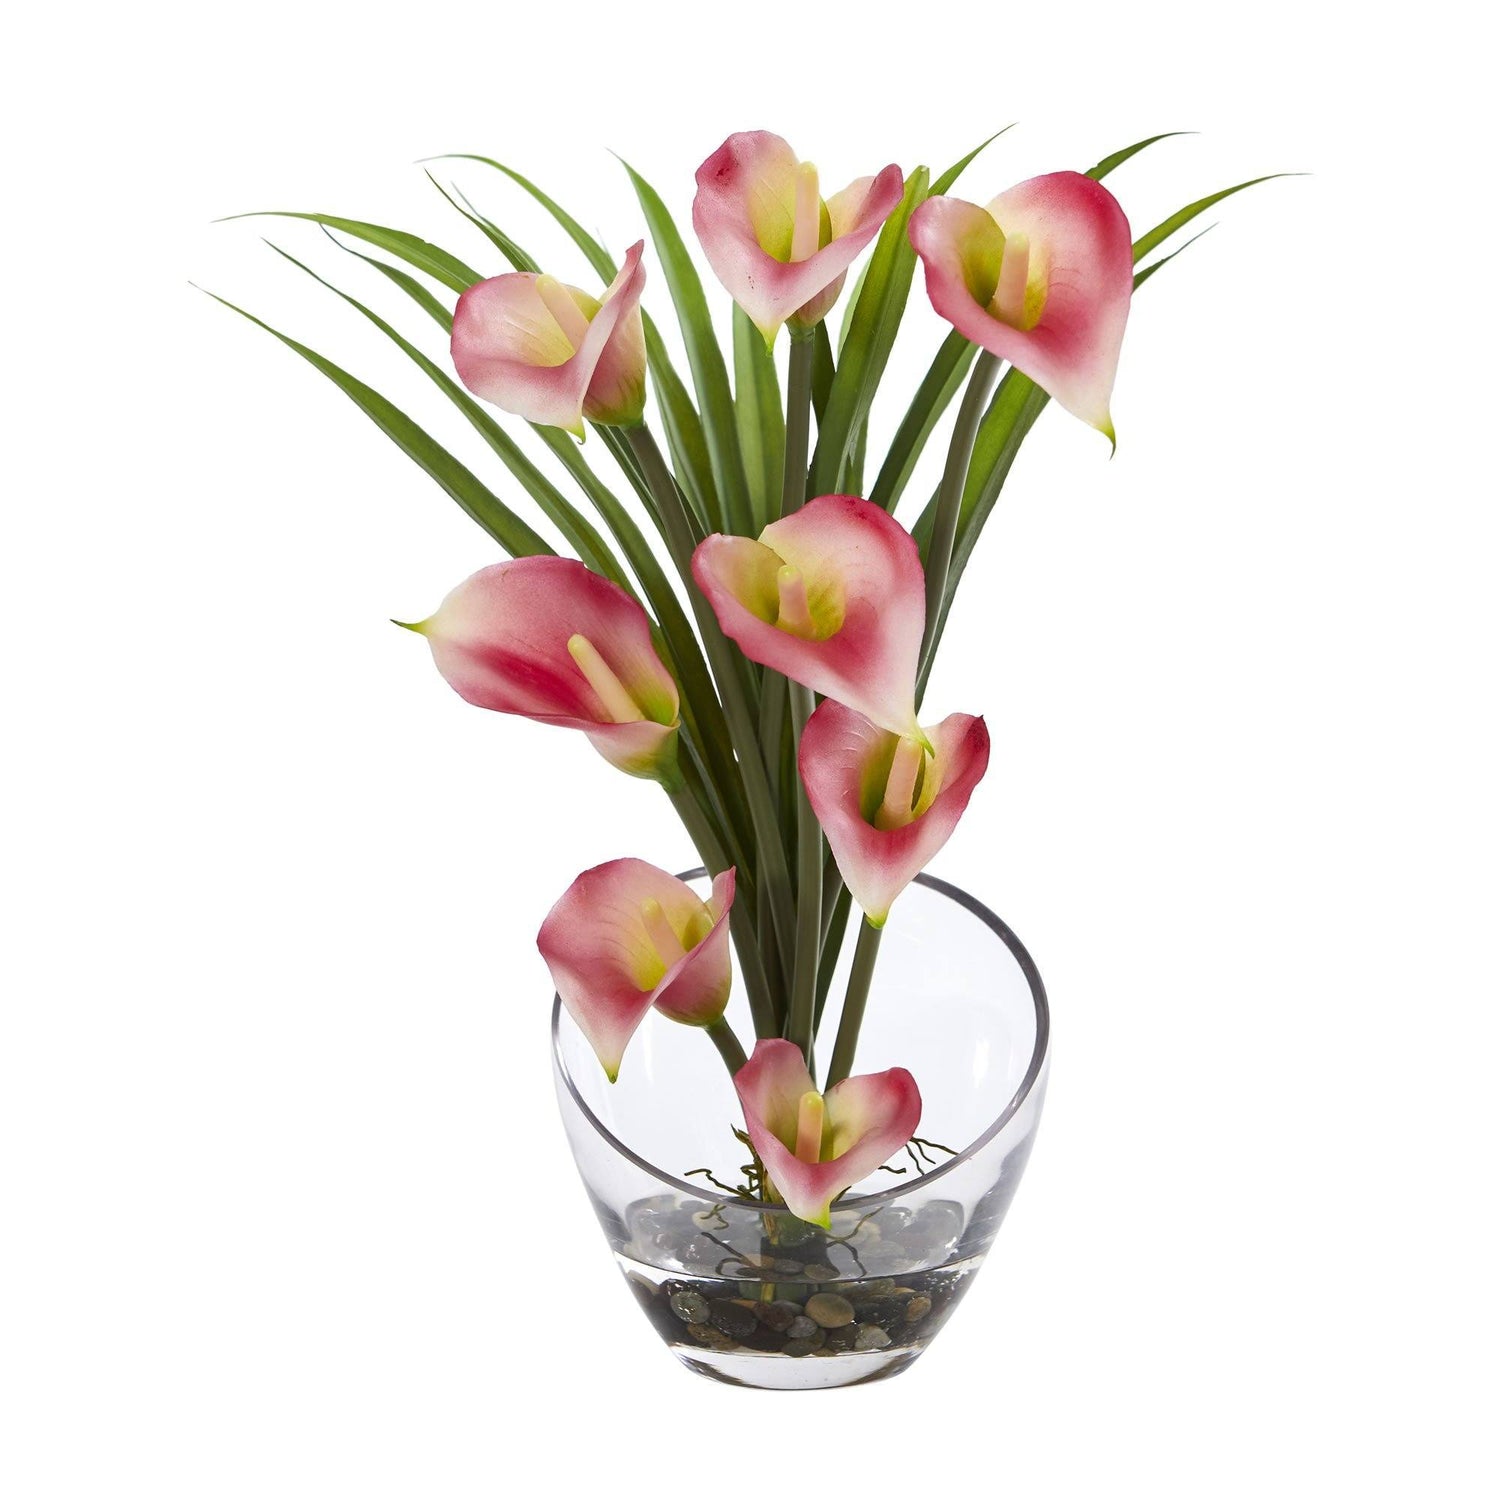 15.5” Calla Lily and Grass Artificial Arrangement in Vase